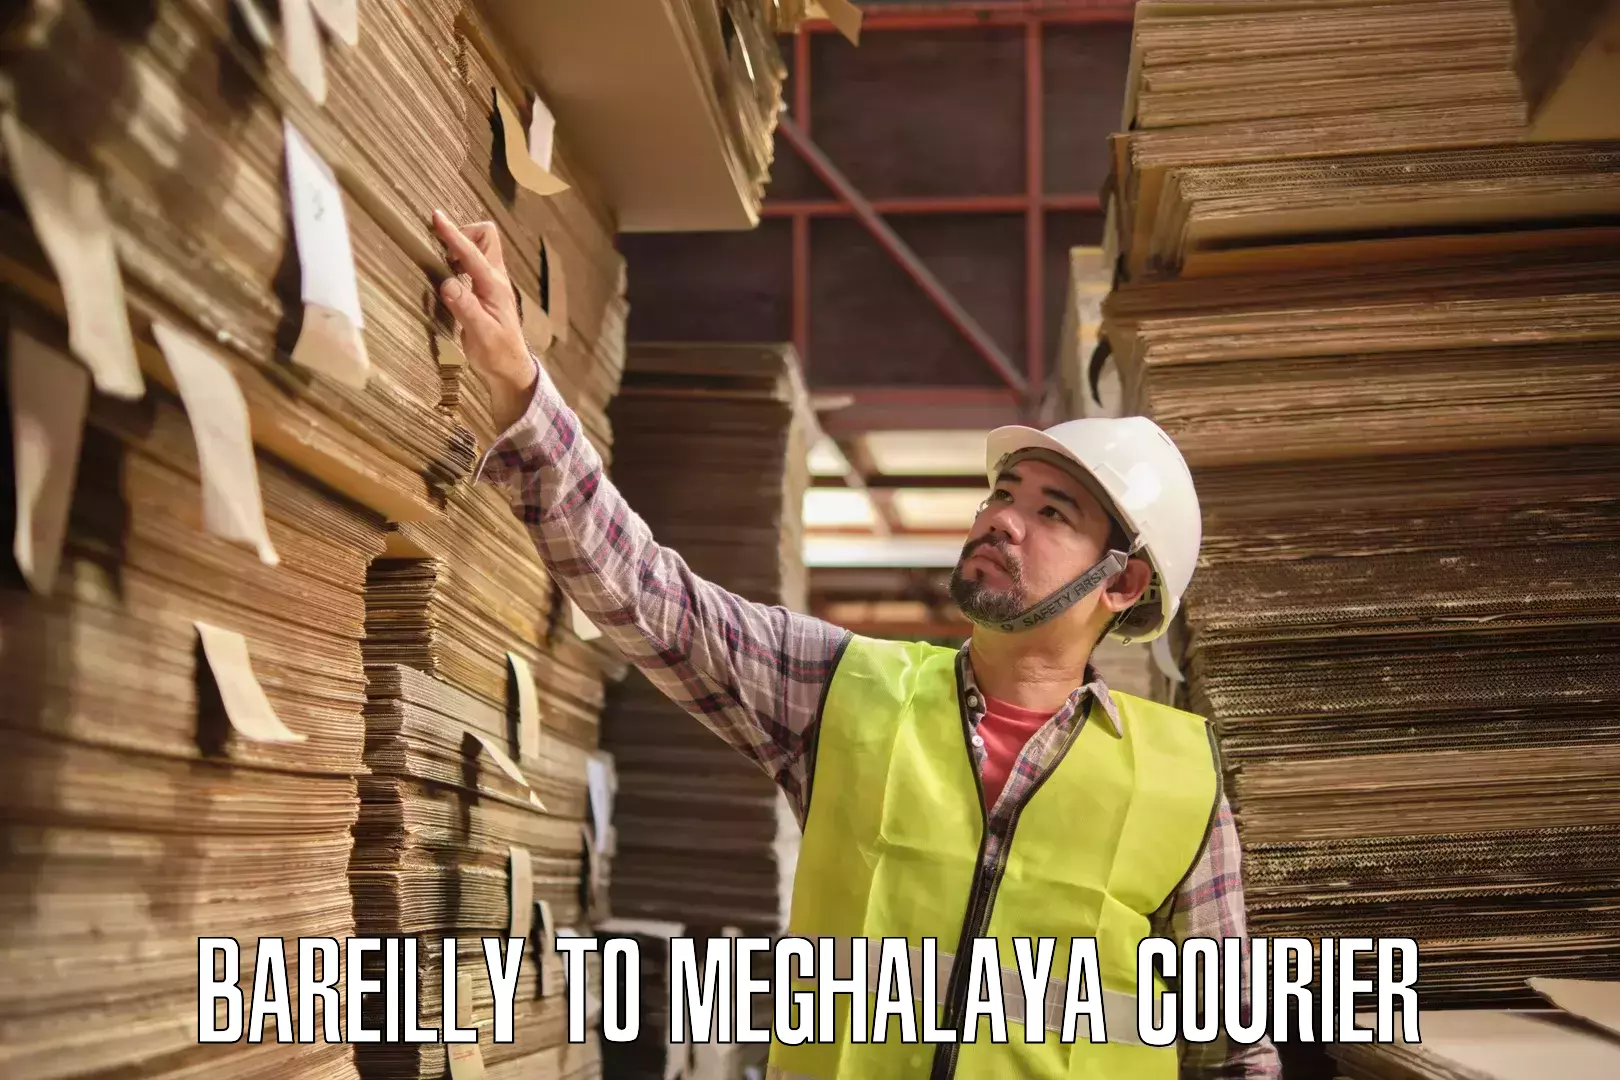 Next-generation courier services Bareilly to Meghalaya